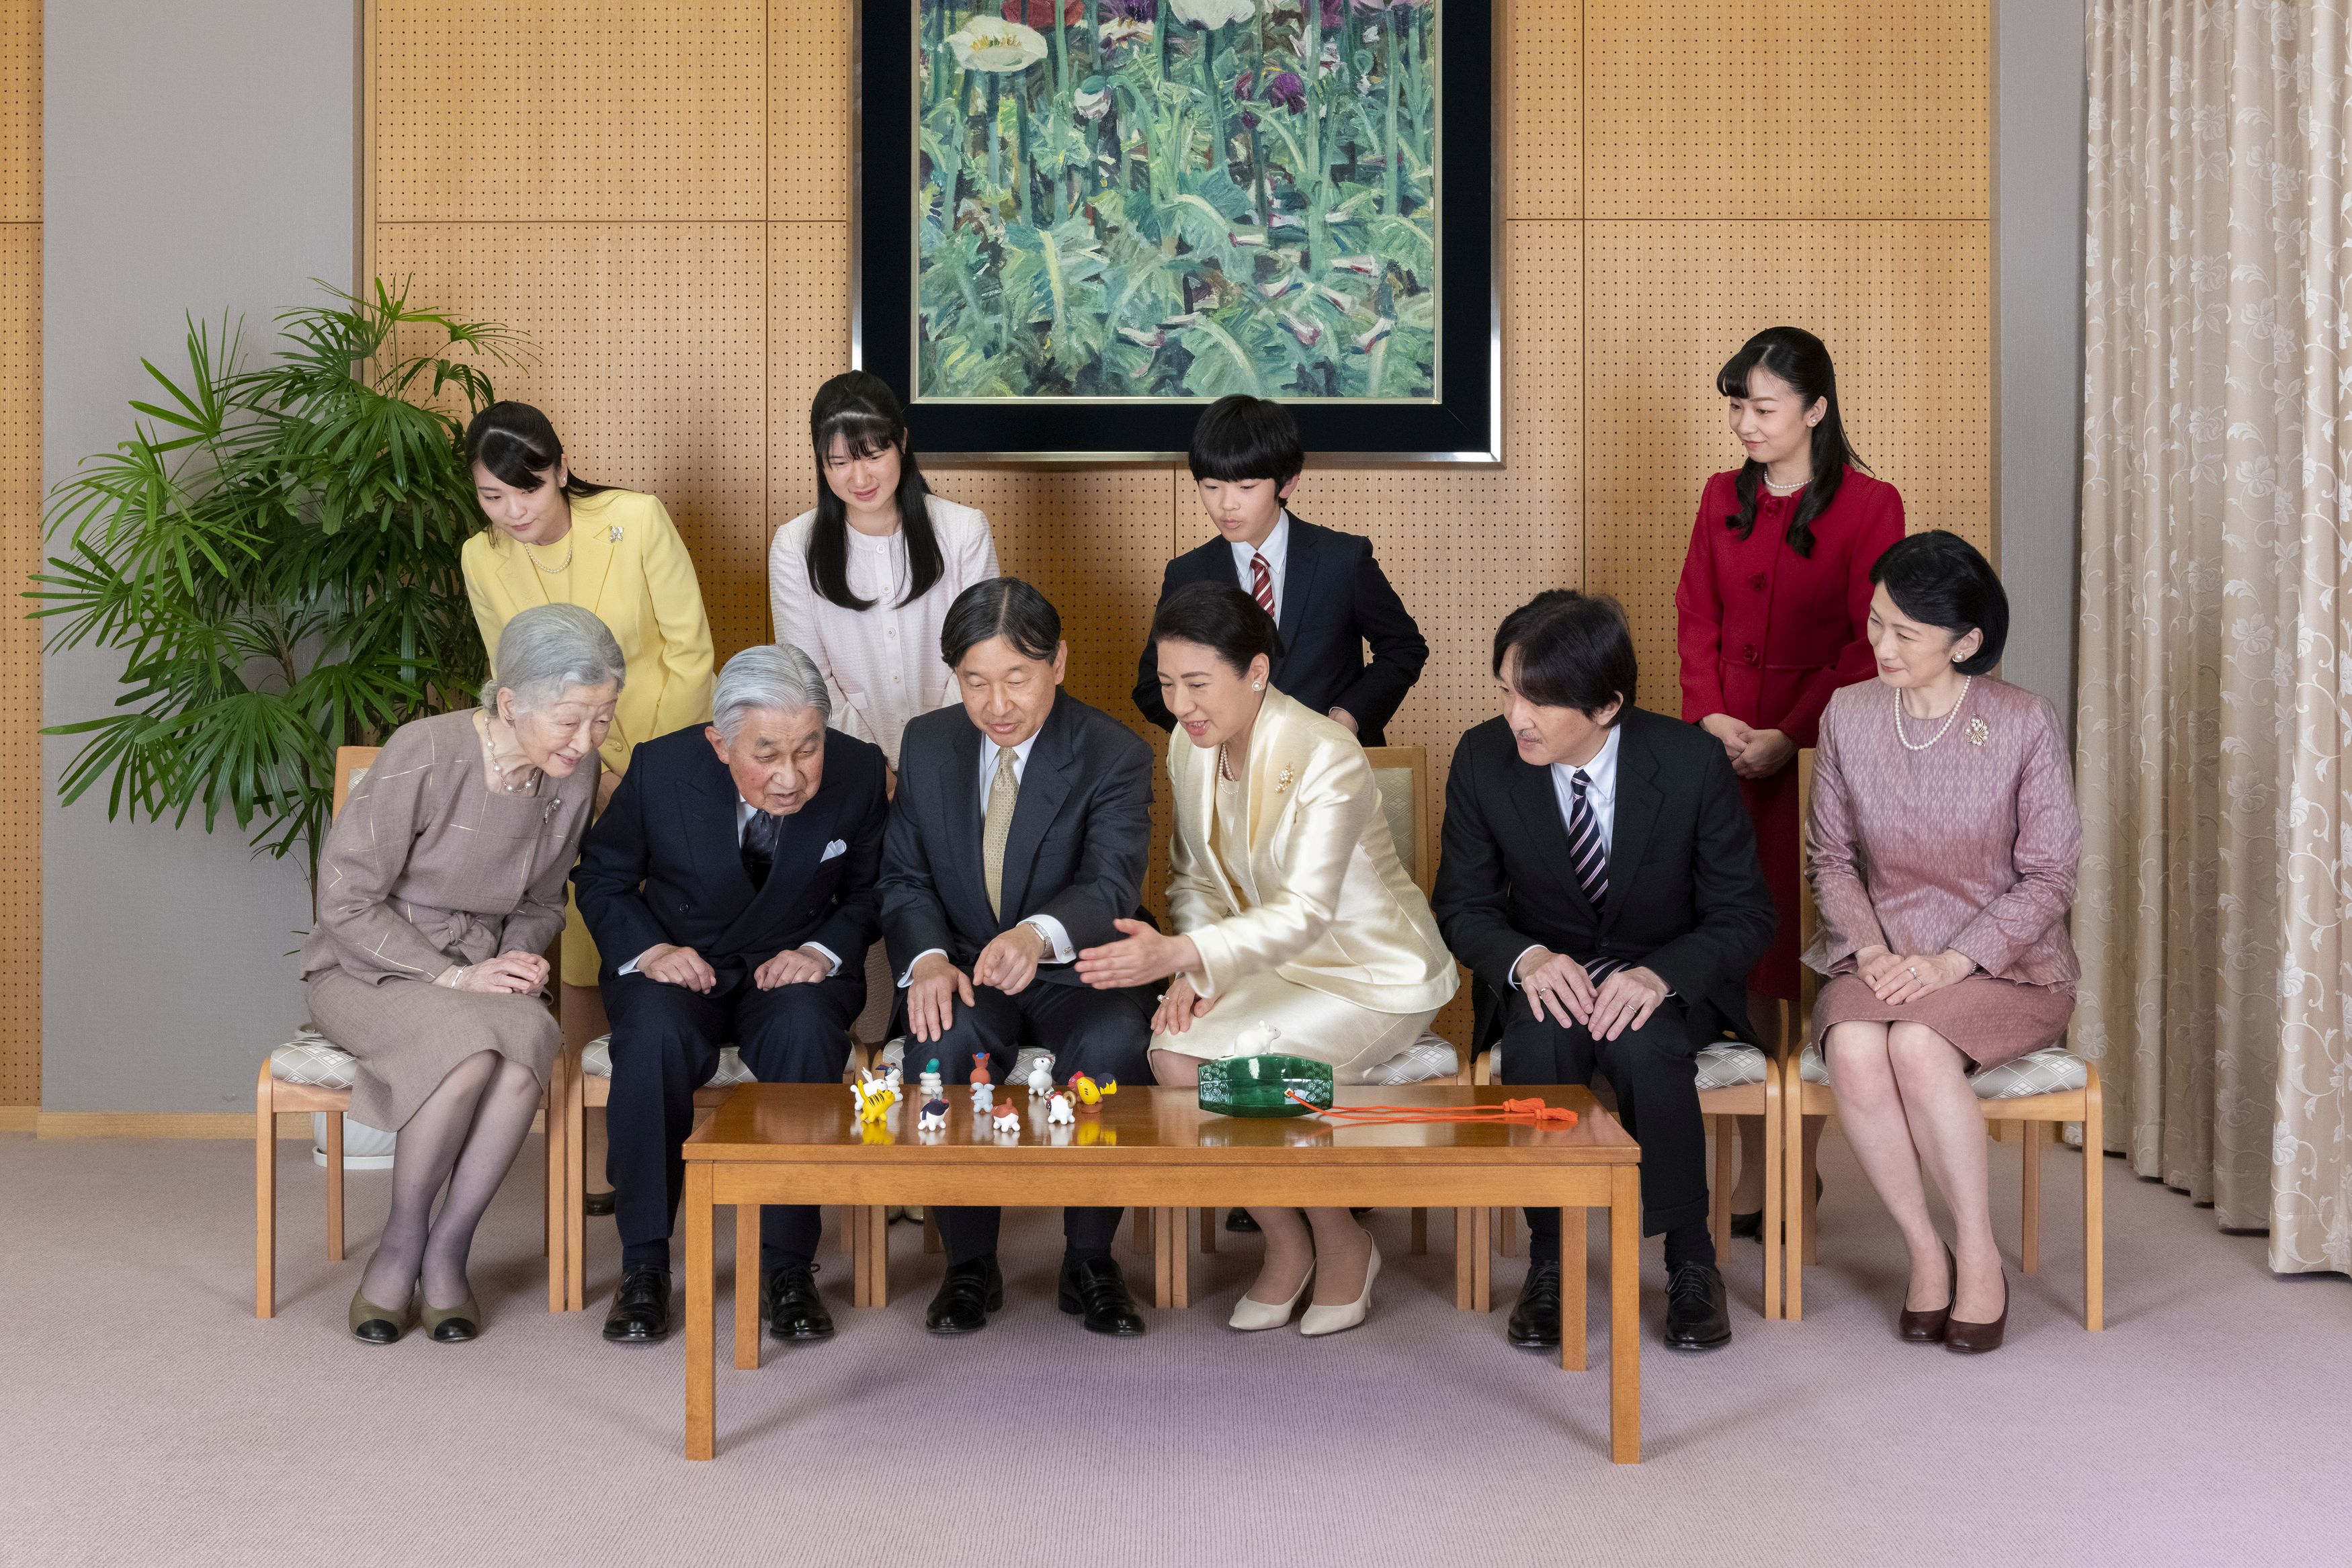 Japan's Emperor Naruhito, seated third from left, and Empress Masako, seated third from right, pose with their family members for a family photo session for the New Year, at their residence in Tokyo in this December 12, 2019, handout photo released by the Imperial Household Agency of Japan on January 1, 2019. With them are Imperial family members (front left to right) Empress Emerita Michiko, Emperor Emeritus Akihito, Crown Prince Akishino, and Crown Princess Kiko, (back from left to right) Princess Mako, Princess Aiko, Prince Hisahito, and Princess Kako. Imperial Household Agency of Japan/Handout via REUTERS. THIS IMAGE HAS BEEN SUPPLIED BY A THIRD PARTY. MANDATORY CREDIT. NO SALES TPX IMAGES OF THE DAY